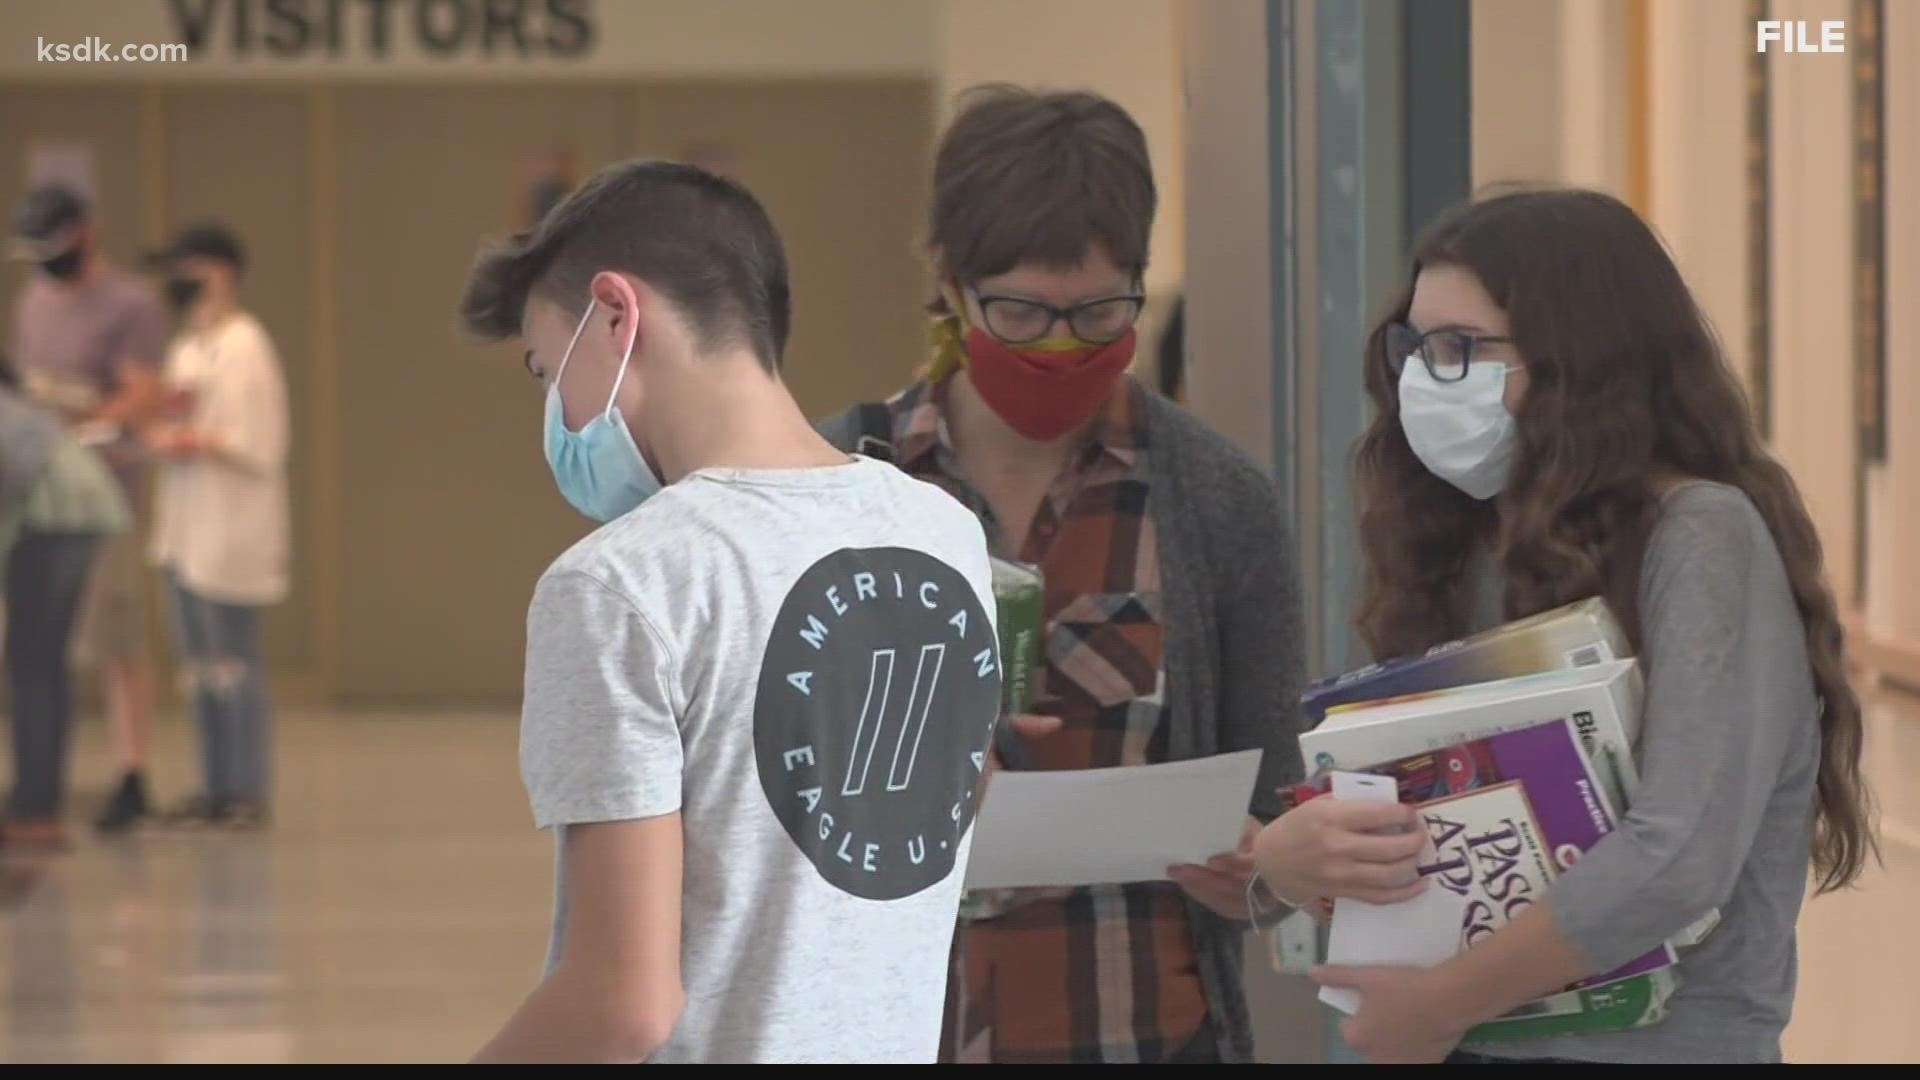 Most of the districts in the region will be moving to mask-optional policies starting Monday.